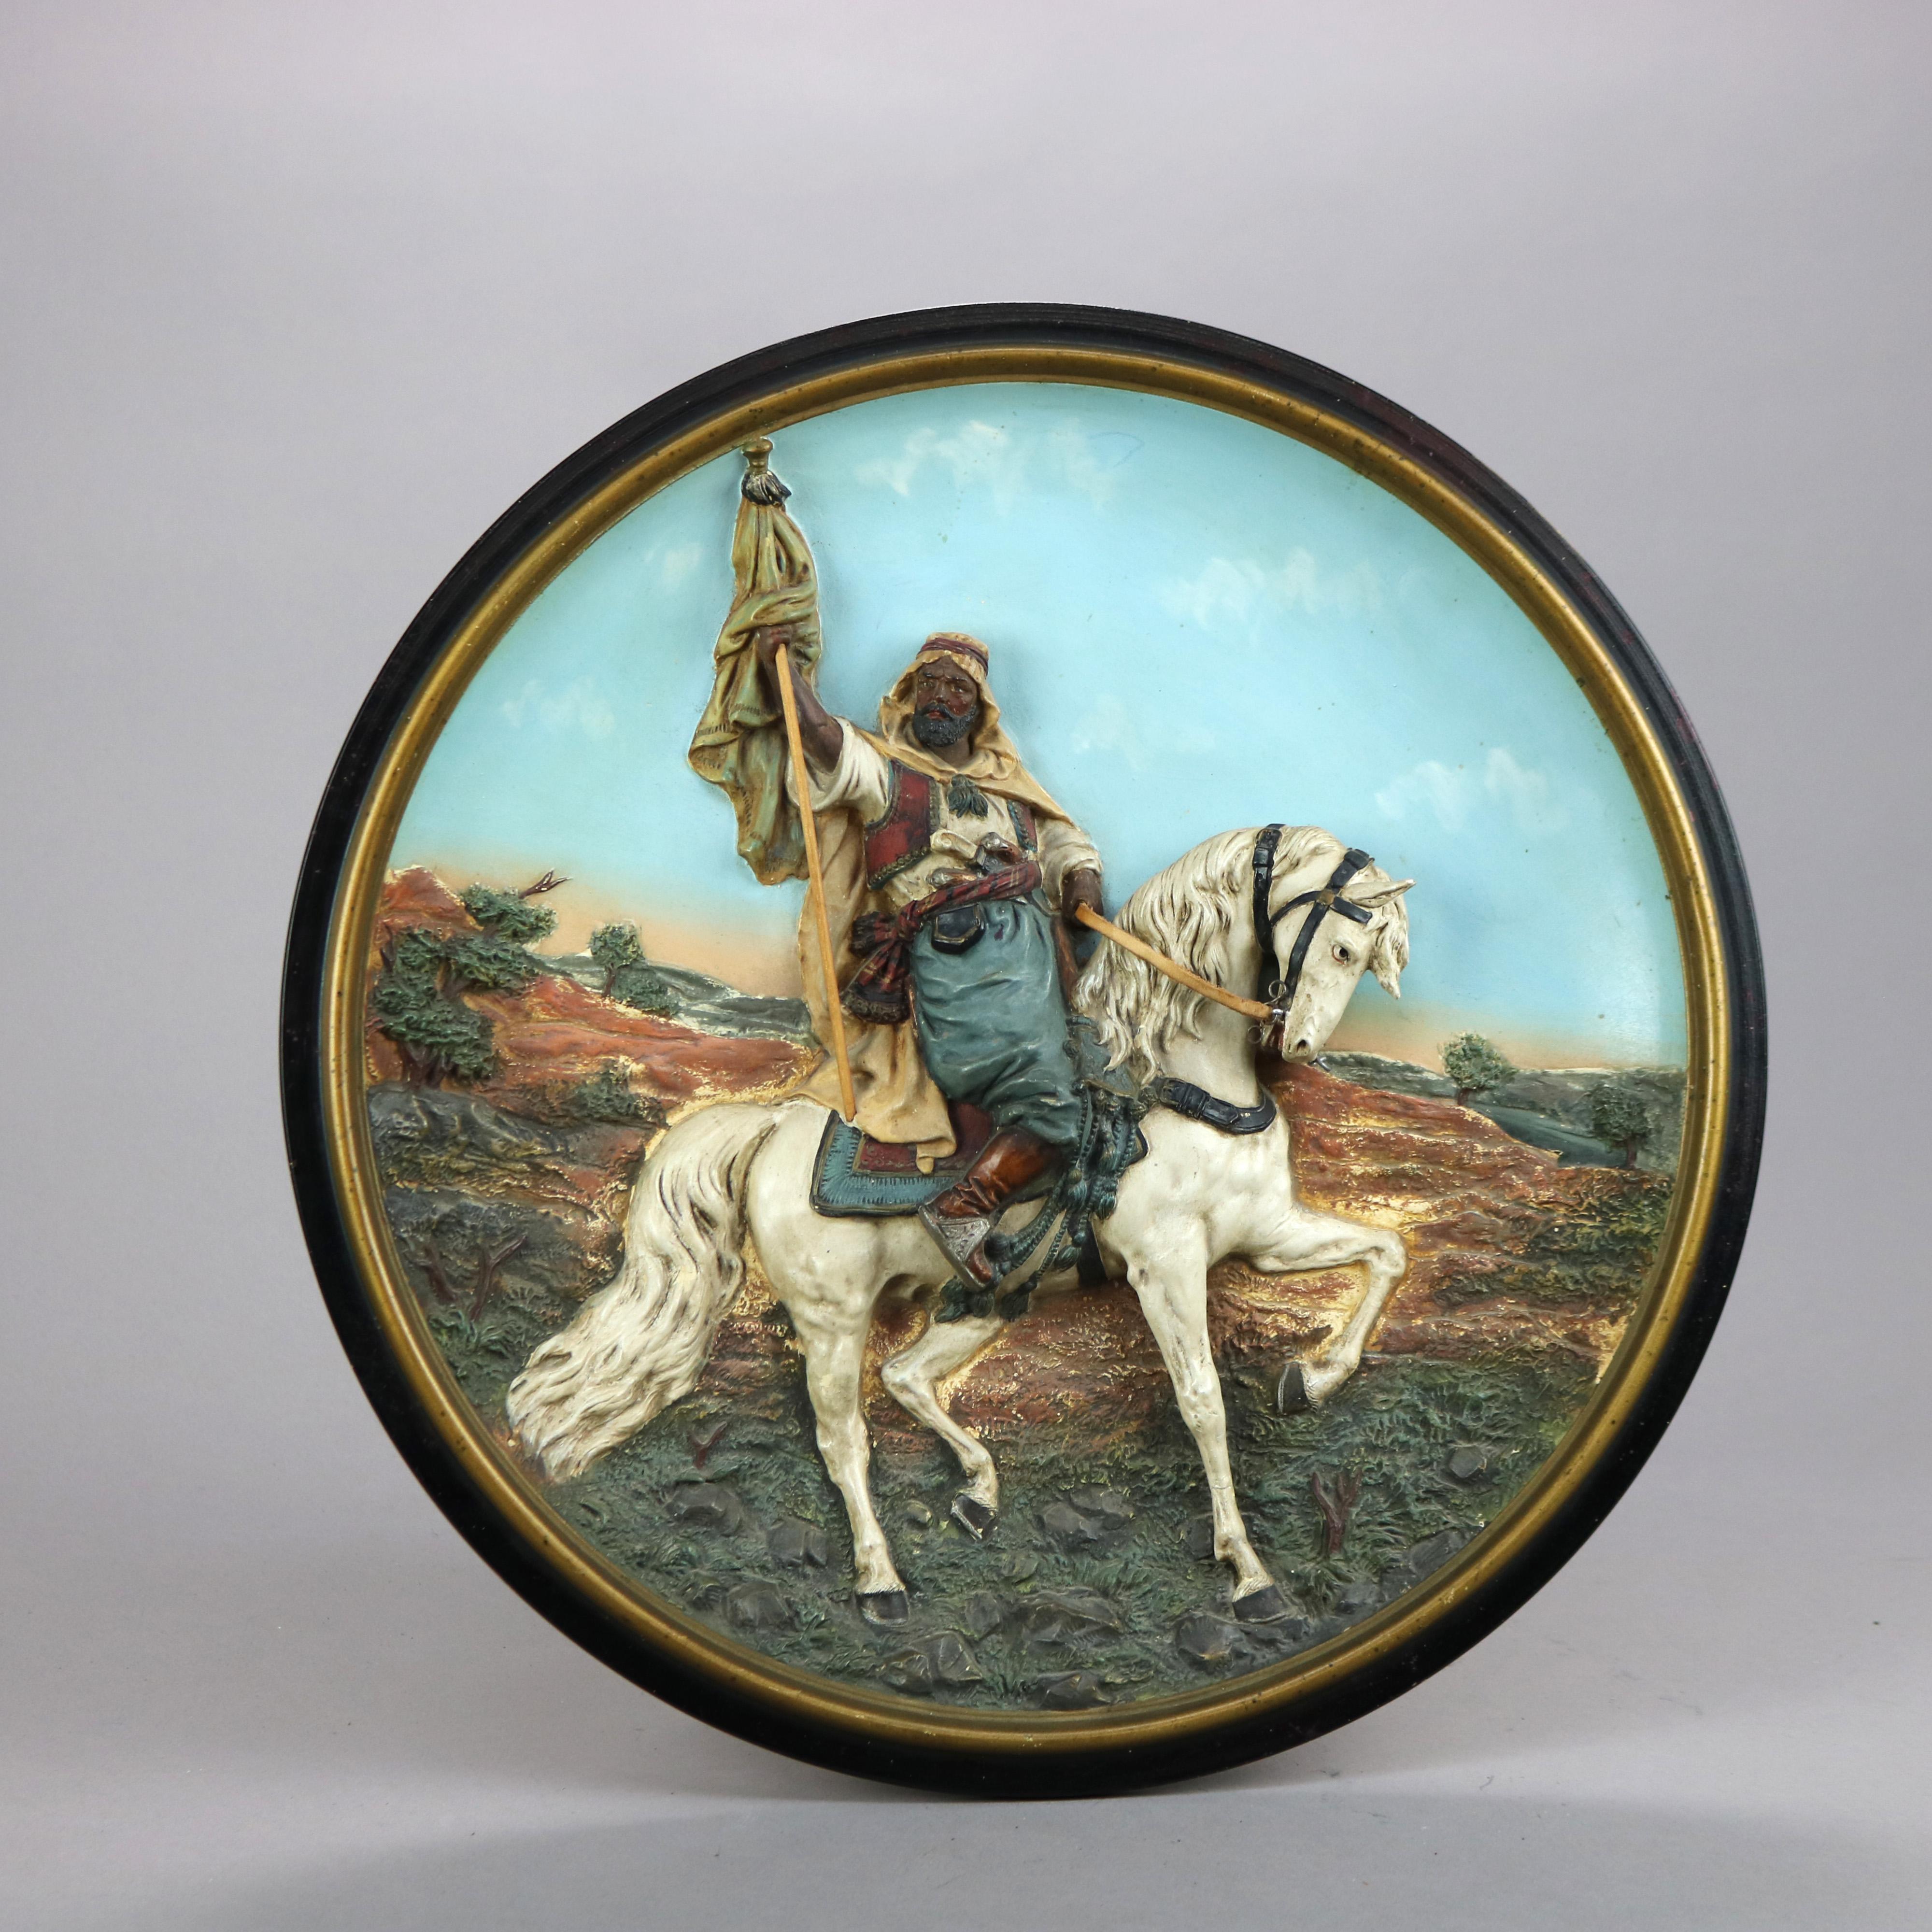 An antique German Amphora pottery charger by Musterschutz offers Moorish scene in relief with horse and rider, maker stamped en verso as photographed, c1910

Measures- 2.25'' H x 15.25'' W x 15.25'' D.

Catalogue Note: Ask about DISCOUNTED DELIVERY